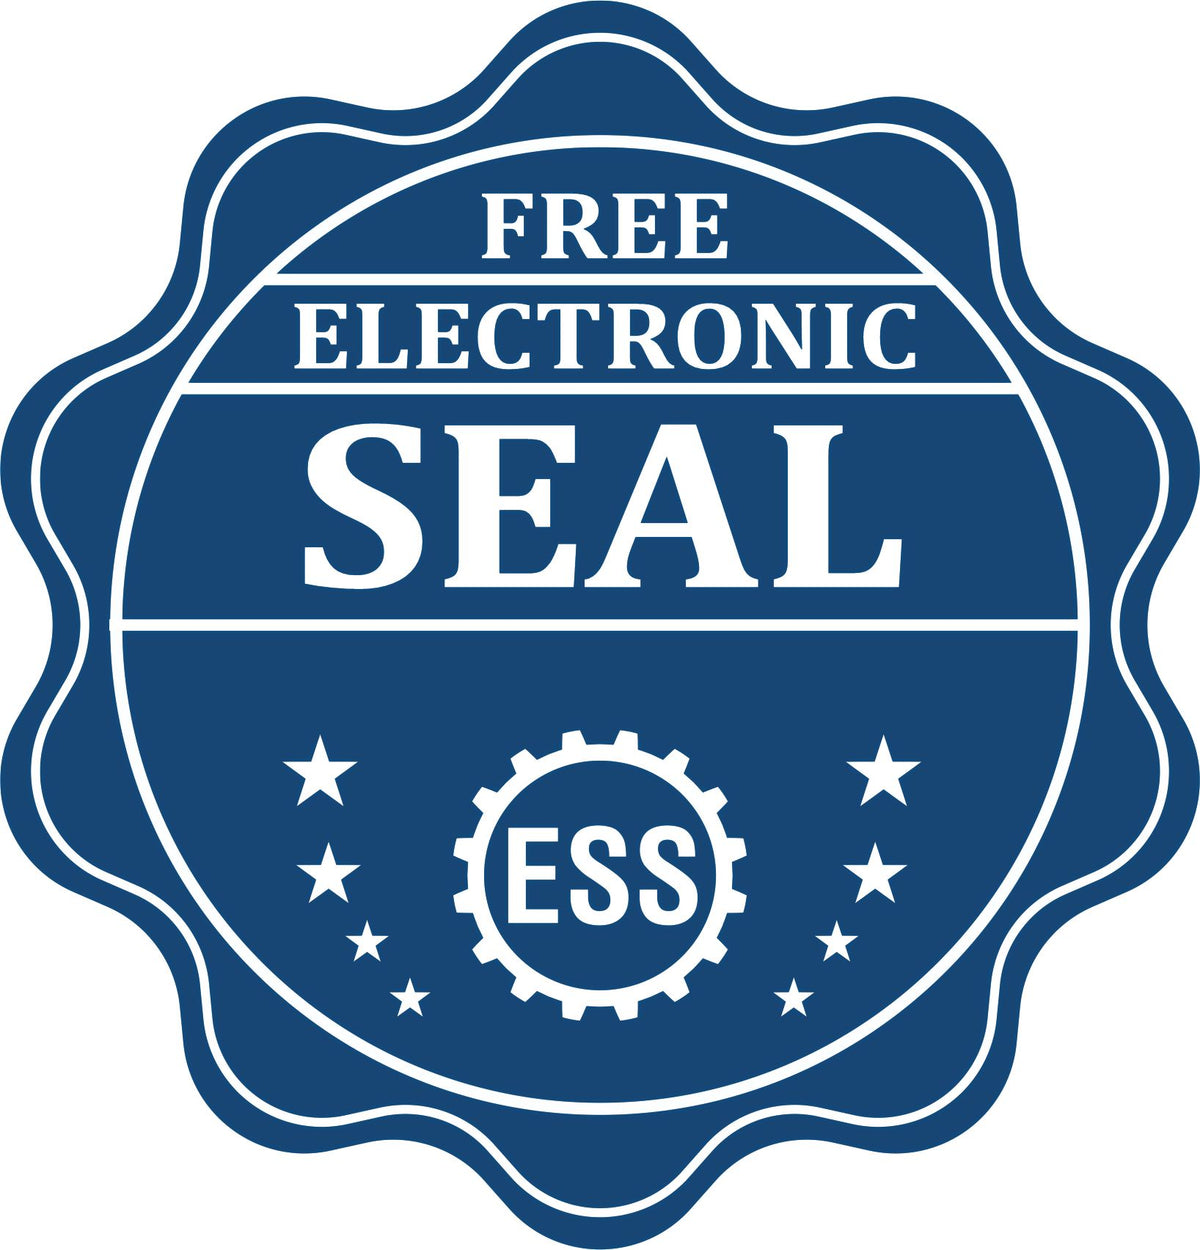 A badge showing a free electronic seal for the Handheld California Professional Engineer Embosser with stars and the ESS gear on the emblem.